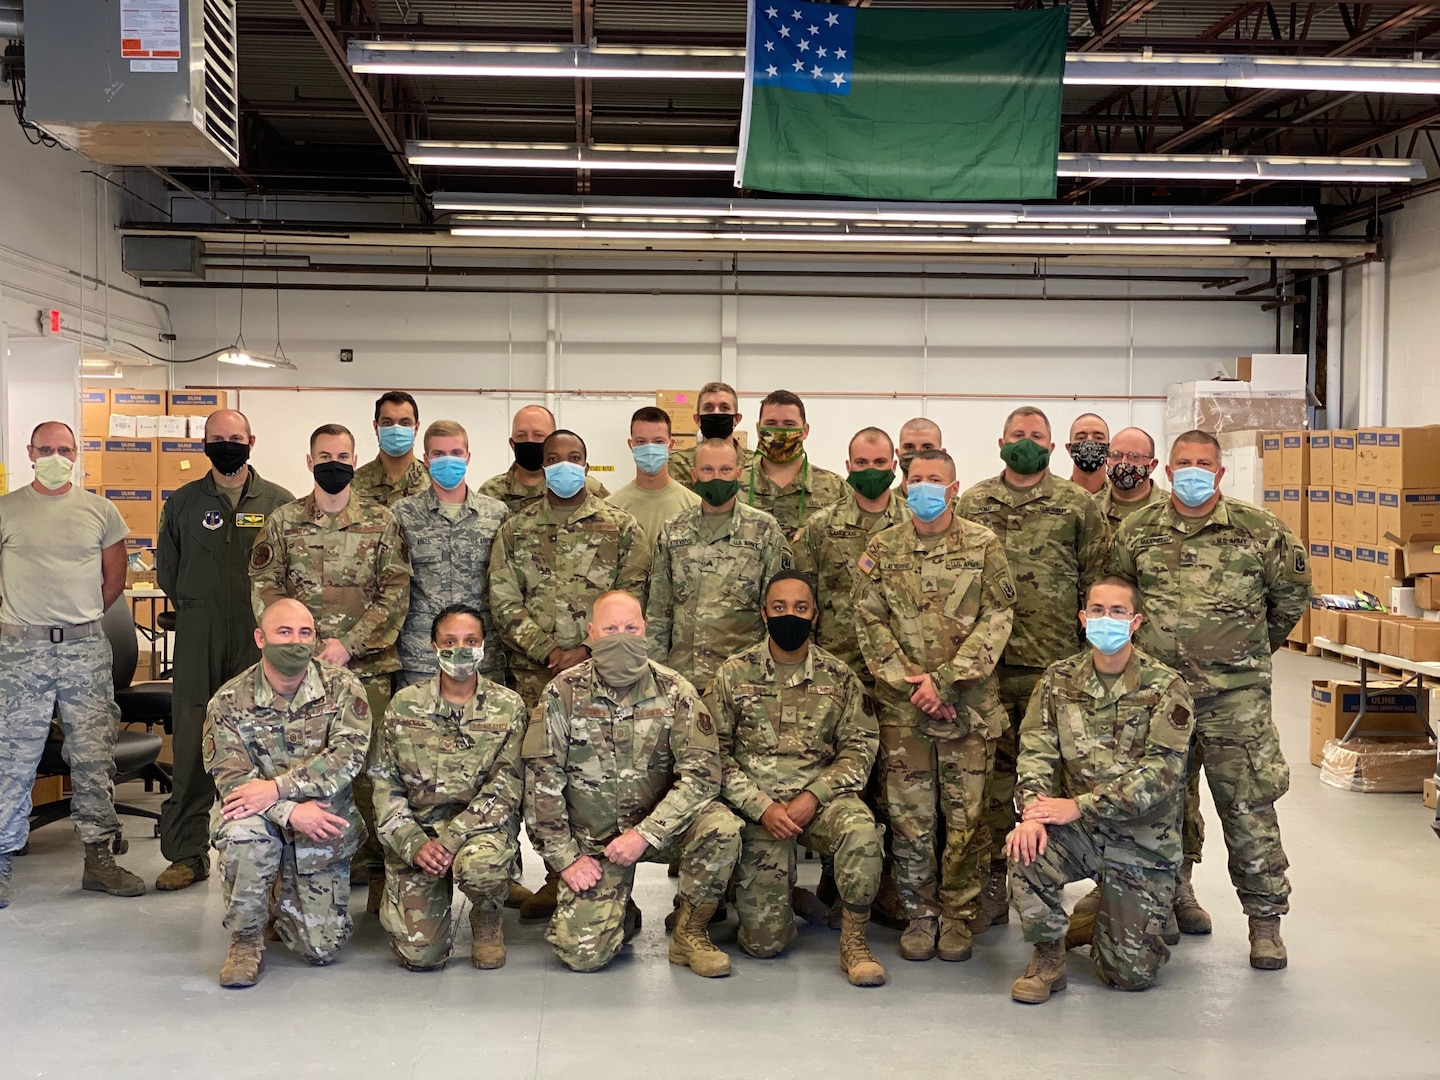 Members of the Vermont National Guard at the Vermont Medical Countermeasures Warehouse Sept. 18, 2020. Guard members continue to work at the site in September 2021, distributing COVID-19 vaccines and personal protective equipment throughout Vermont.